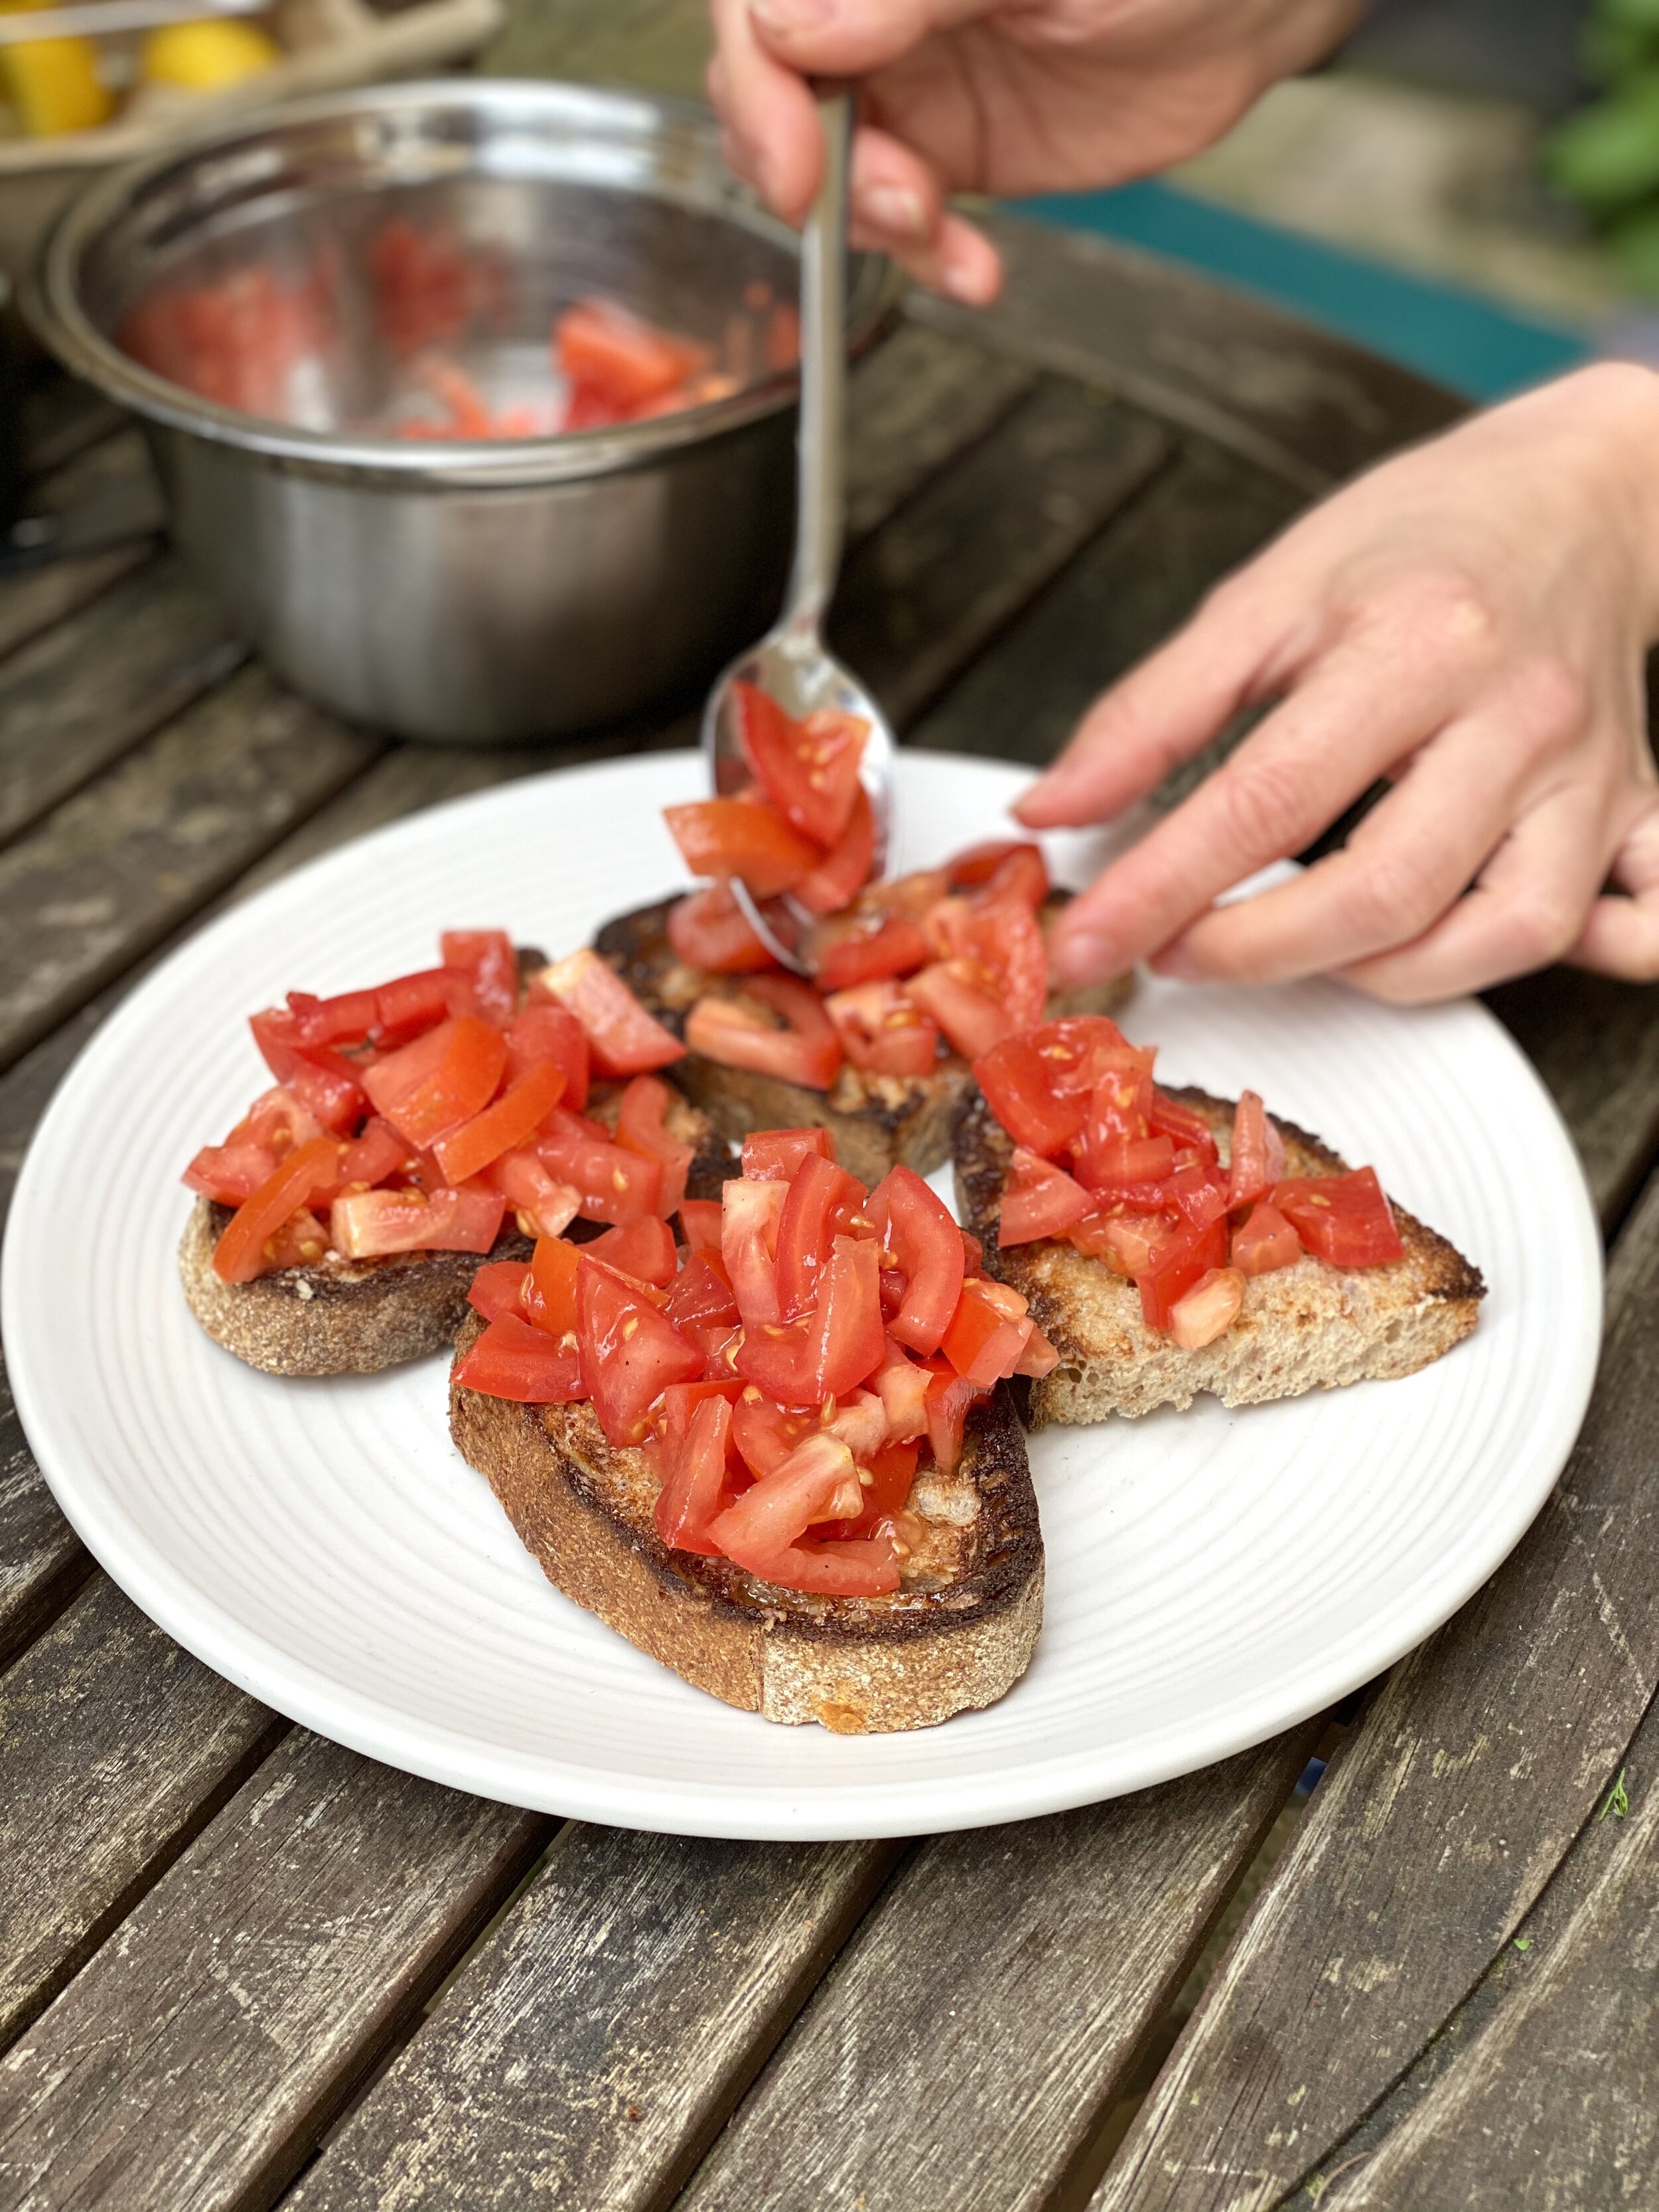 Spooning tomatoes onto charred sourdough